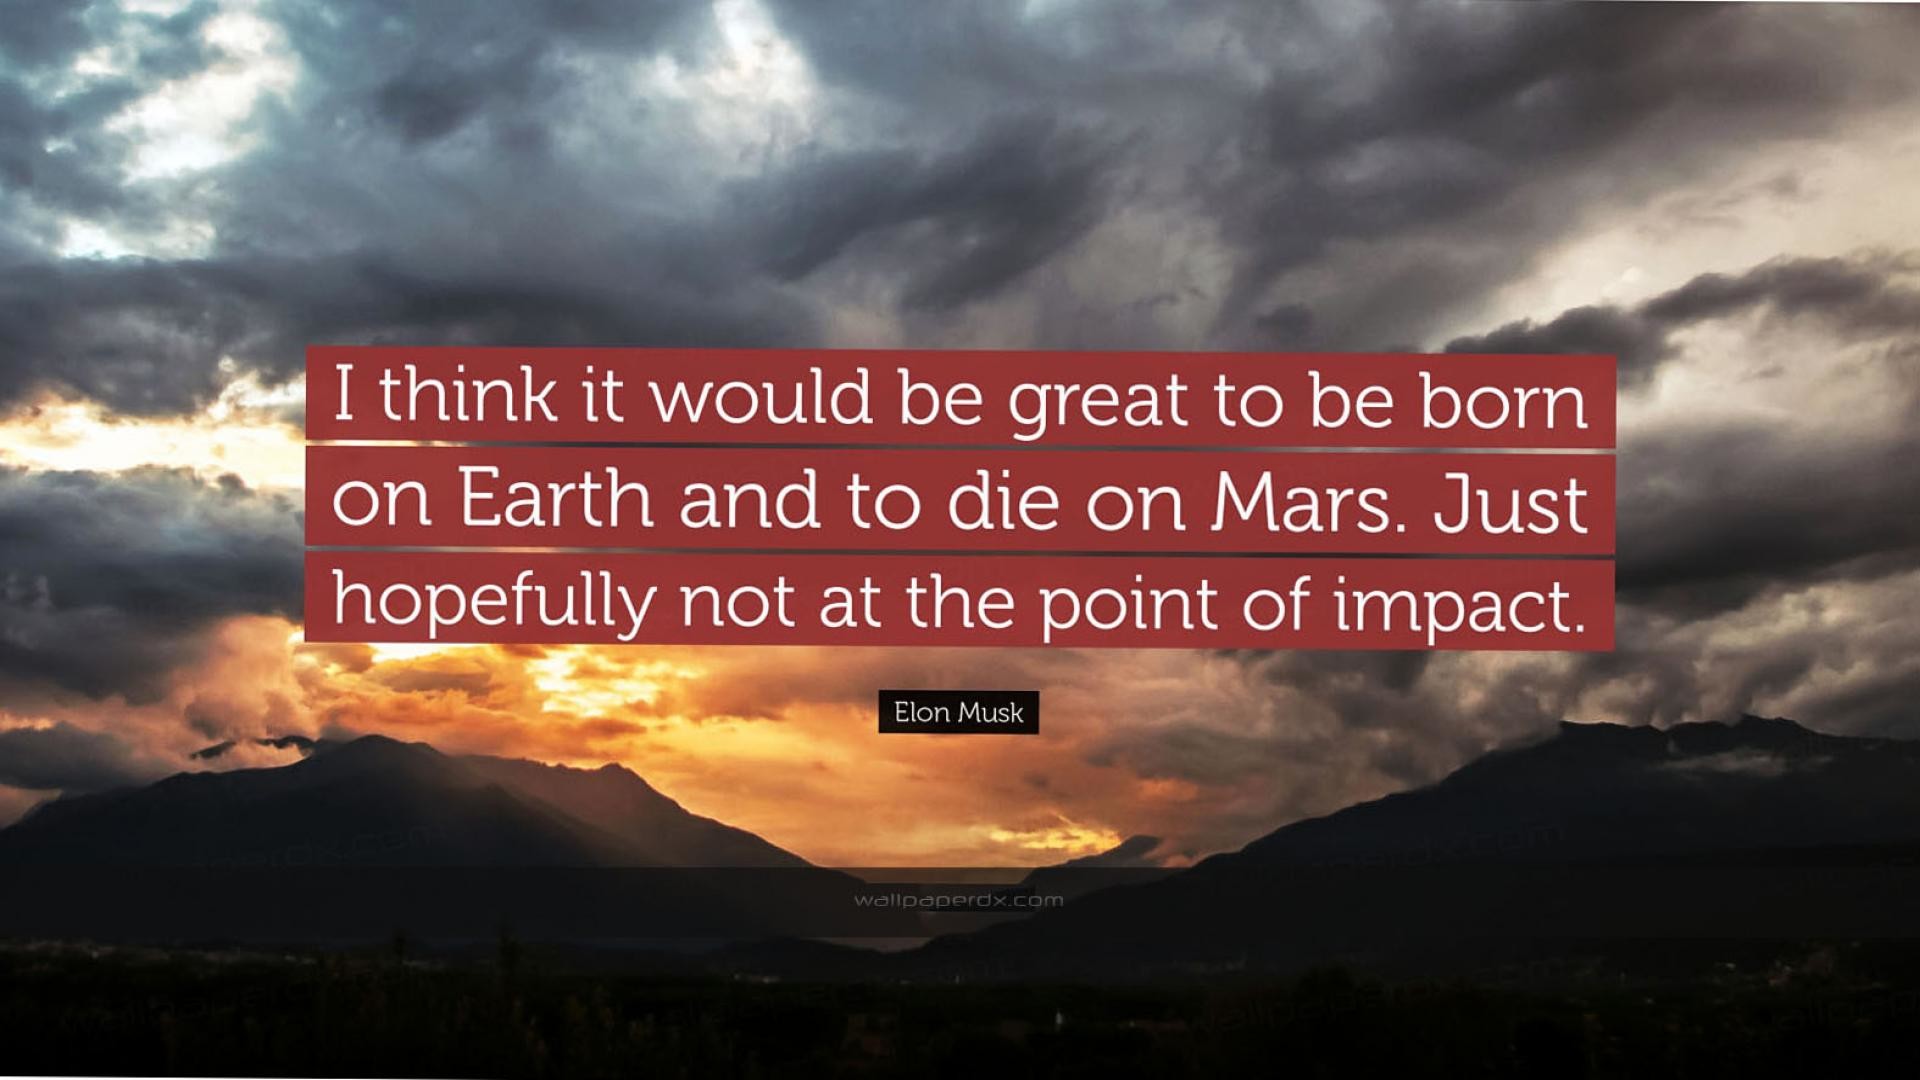 1920x1080 2312 elon musk quote i think it would be great to be born on earth and hd  wallpaper - 1920 x 1080